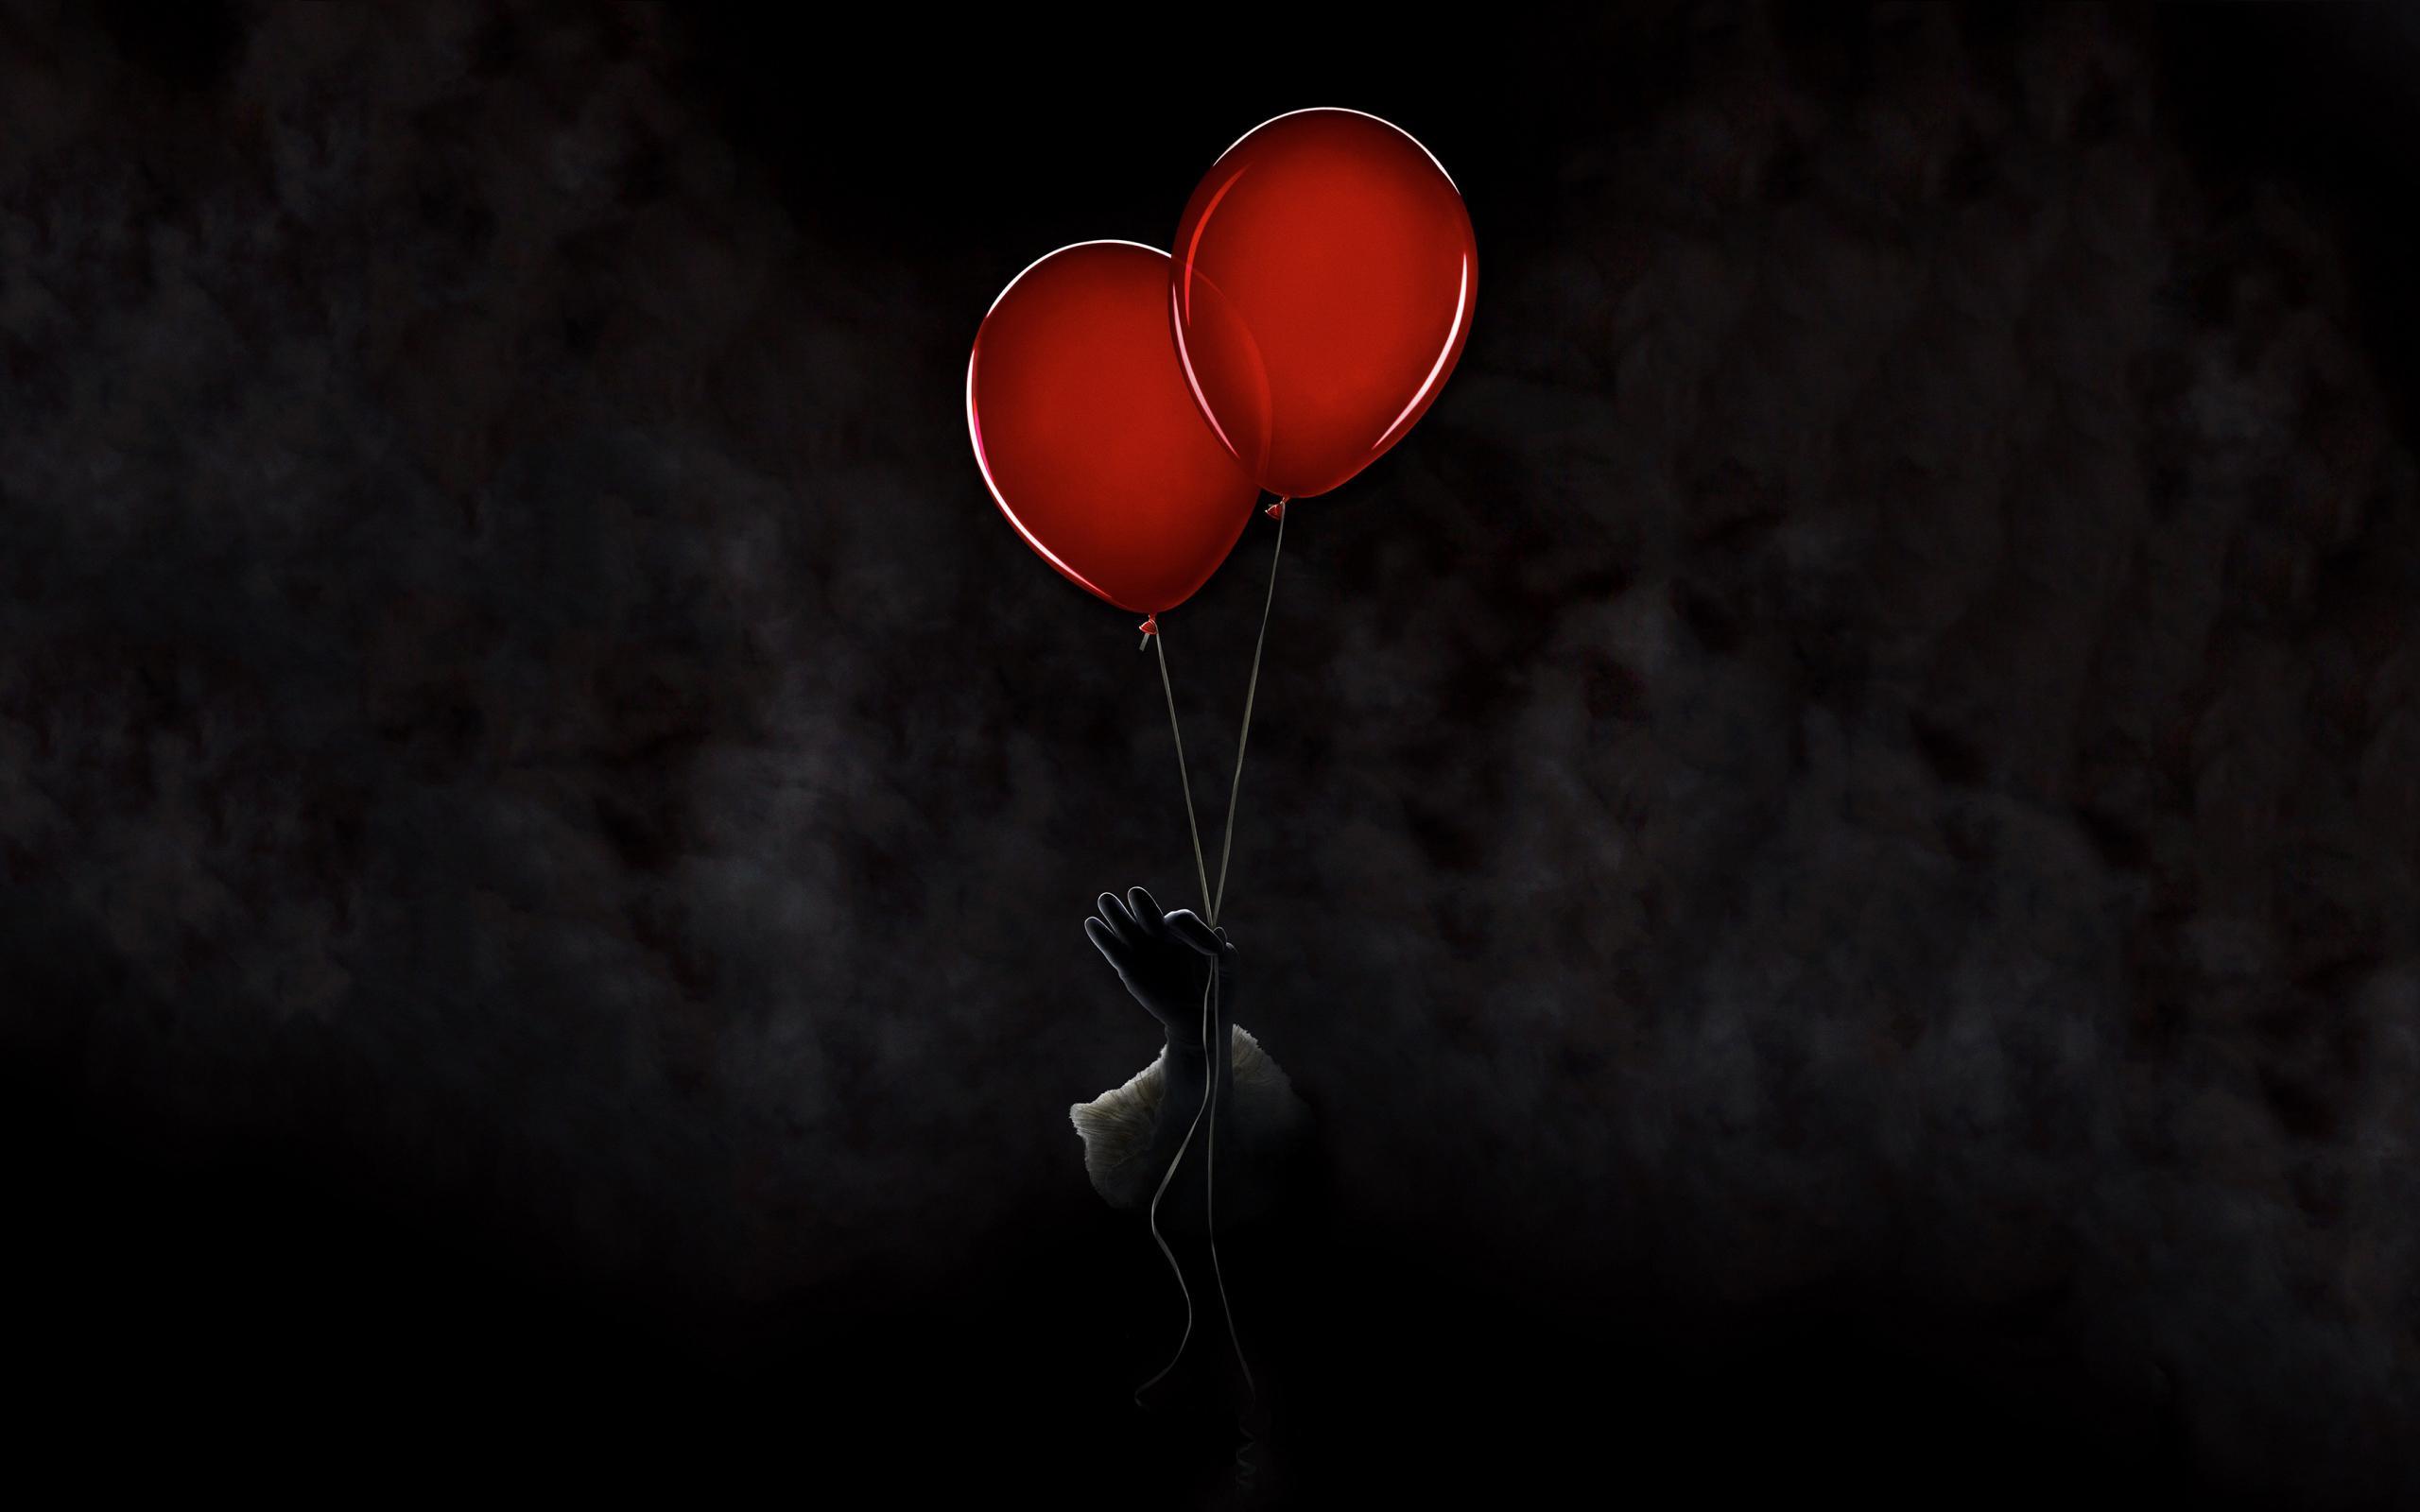 Wallpapers of Movie, It, IT Chapter Two backgrounds & HD image